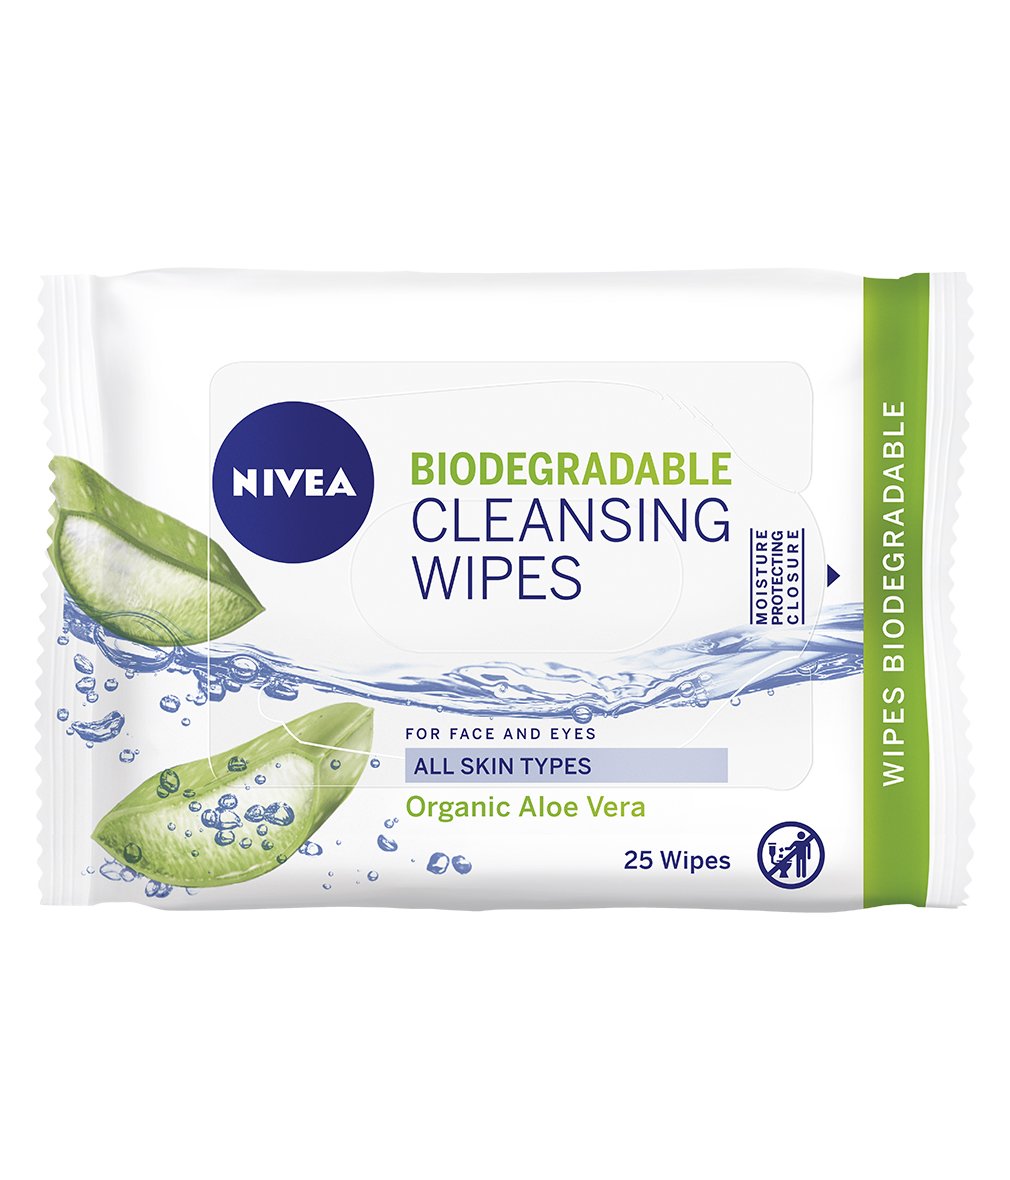 Nivea Biodegradable Cleansing Wipes 25s